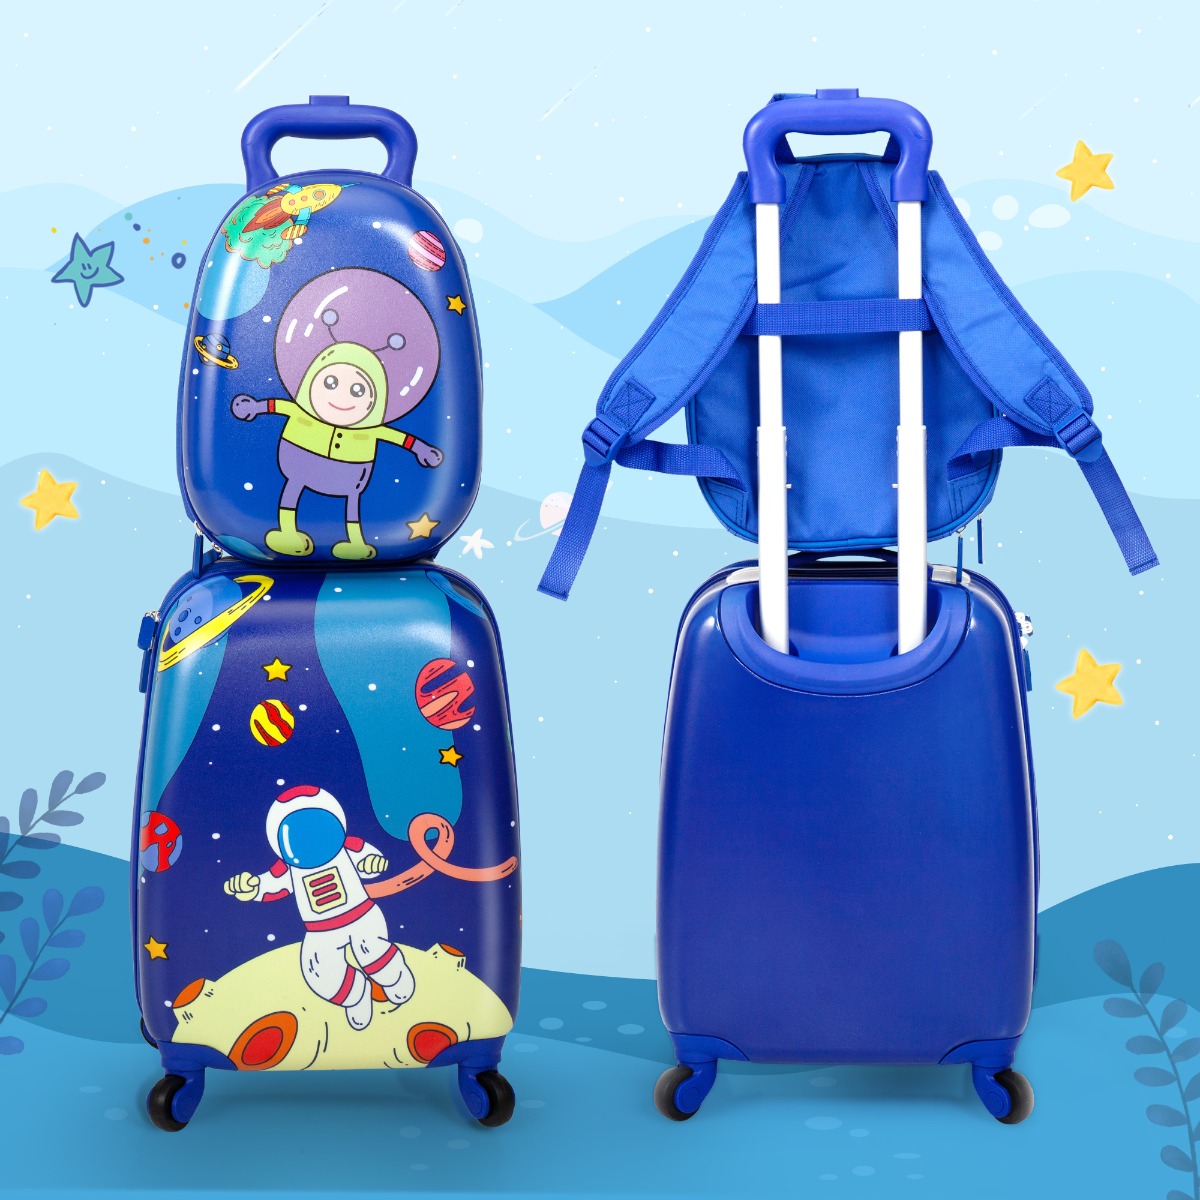 Jaxpety 2 Pcs Kid Luggage Set, Kids Carry-On Suitcase with Spinner Wheels, Gift for Children, Blue ( Astronaut )